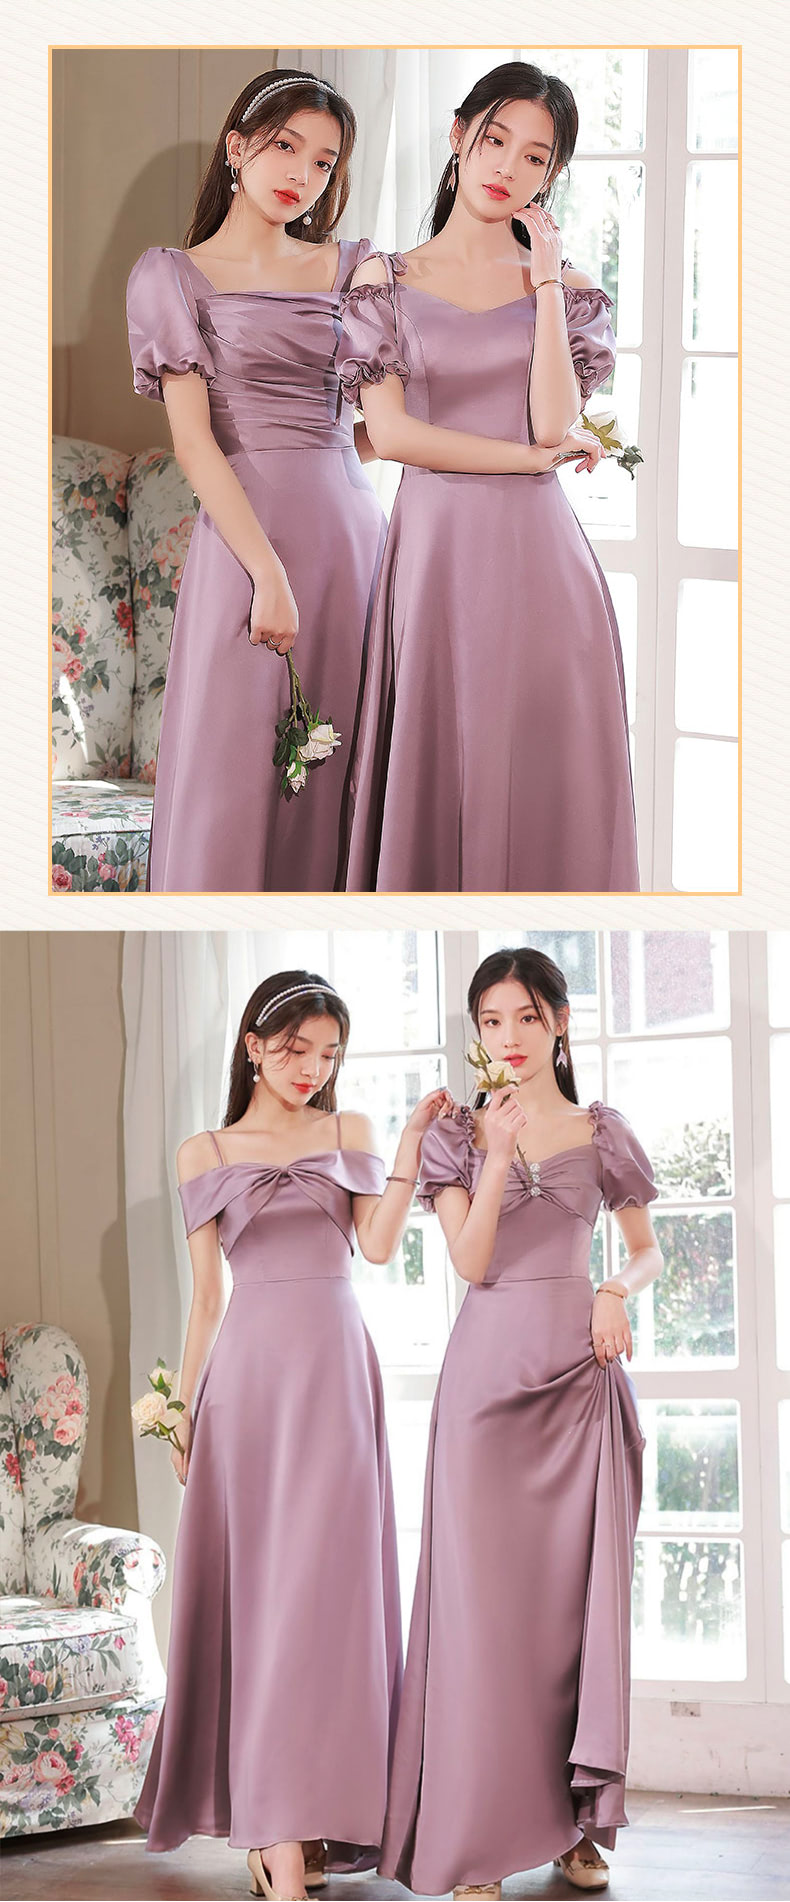 Sweet-Sexy-Purple-Satin-Bridesmaid-Long-Dress-Party-Casual-Ball-Gown12.jpg